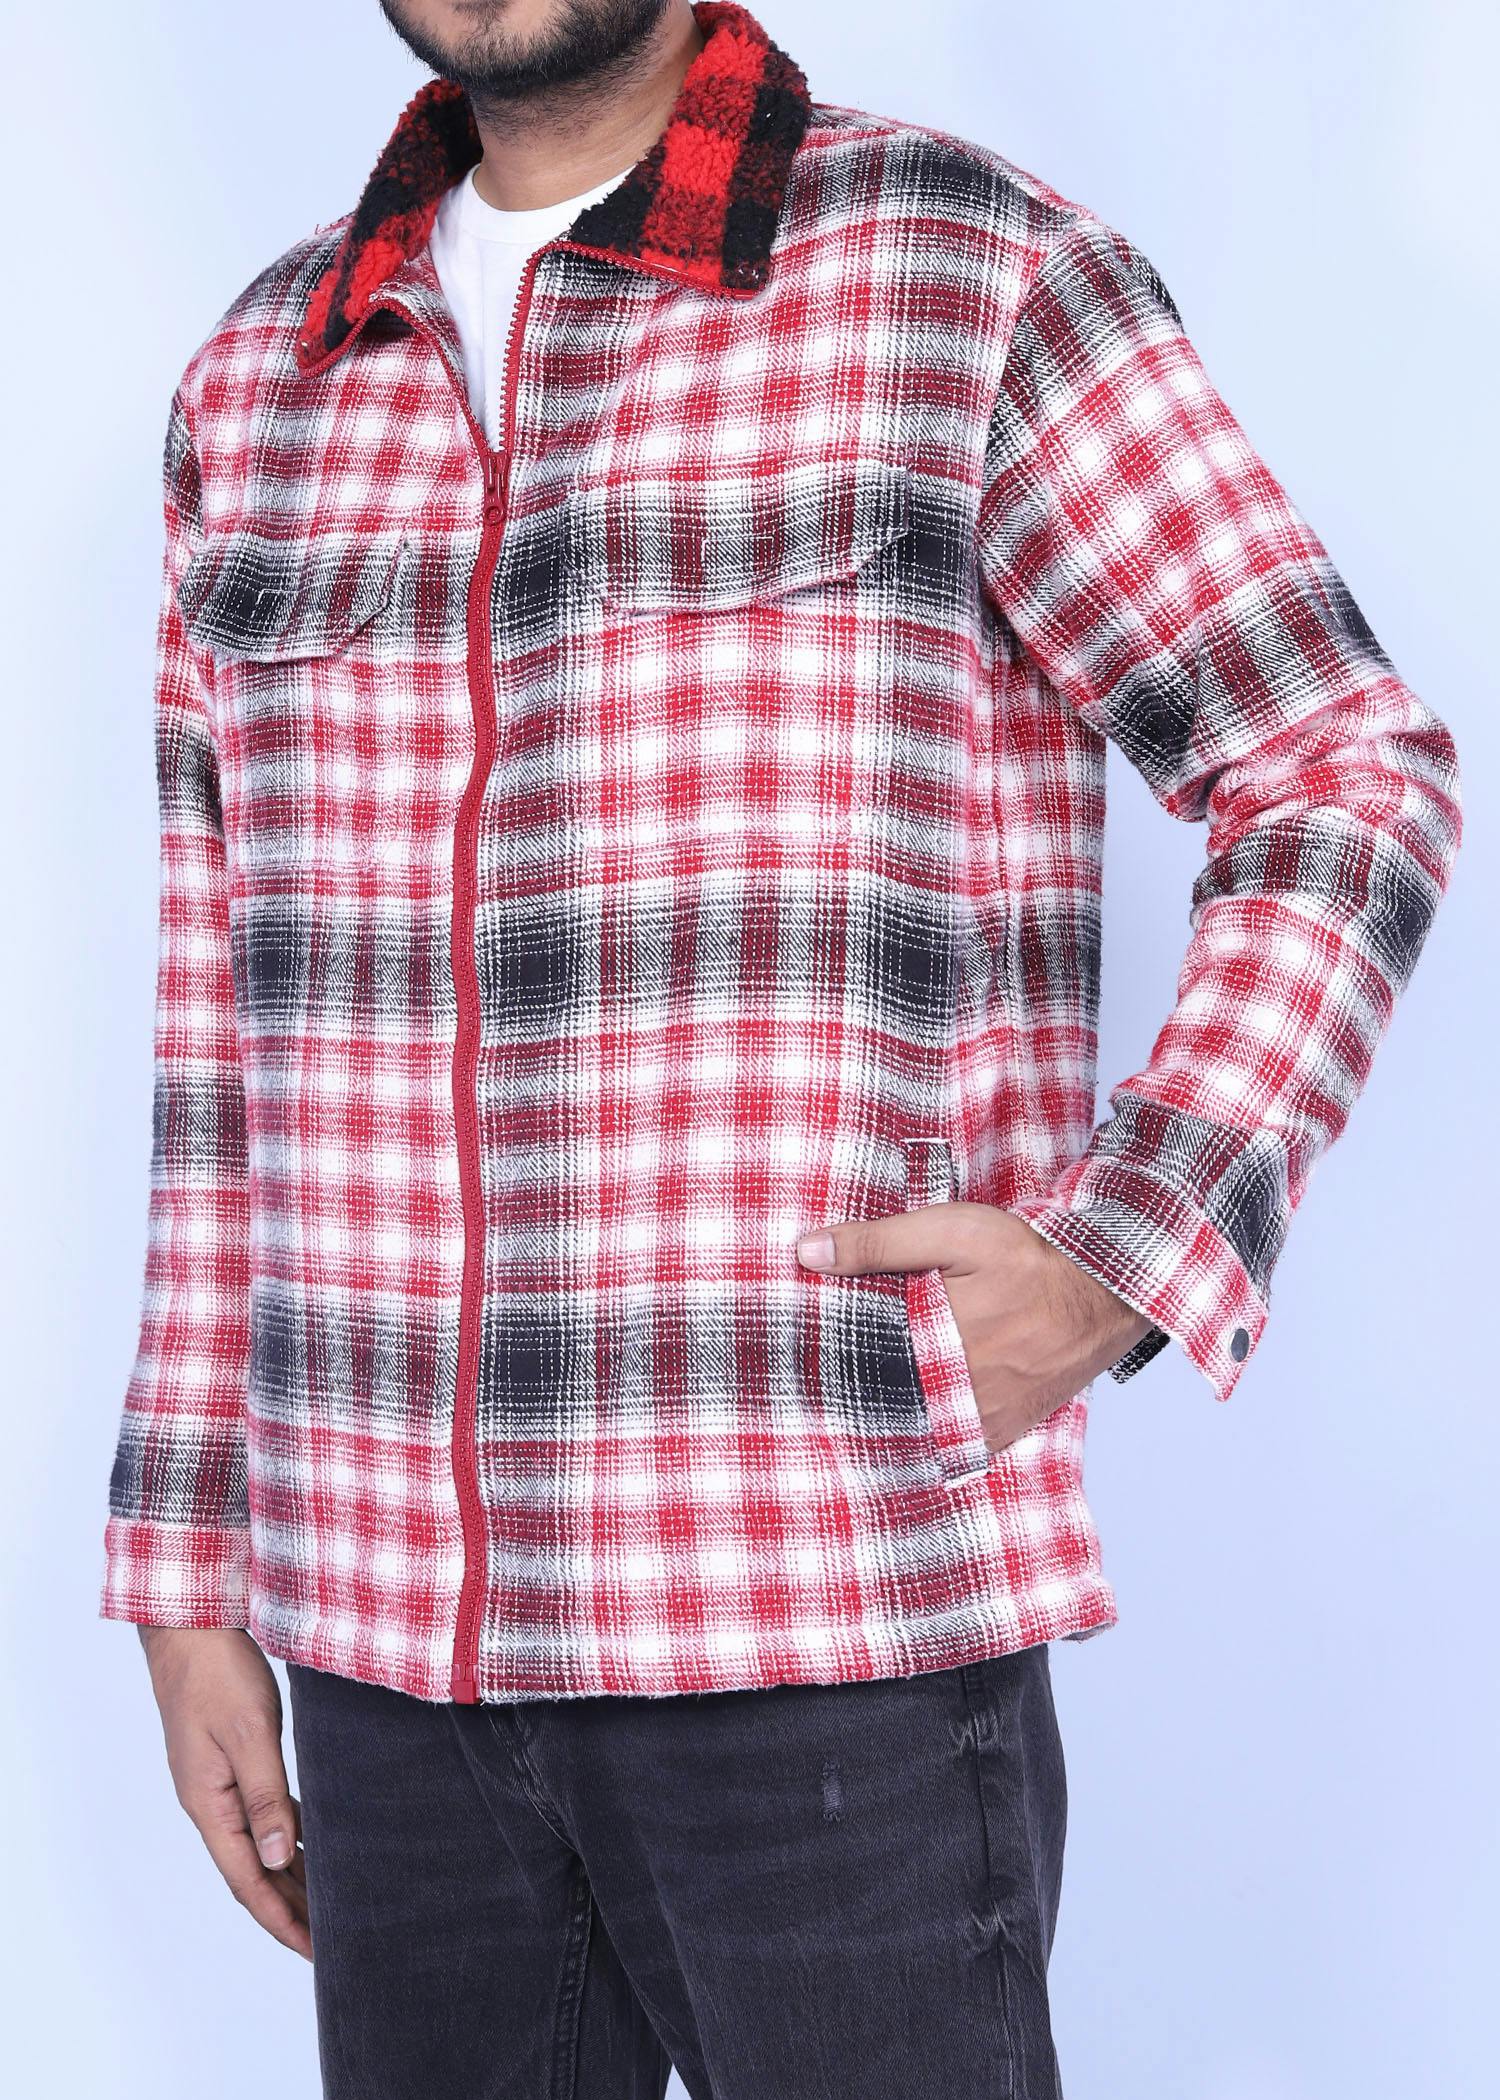 junco i sherpa jacket red check color half side view